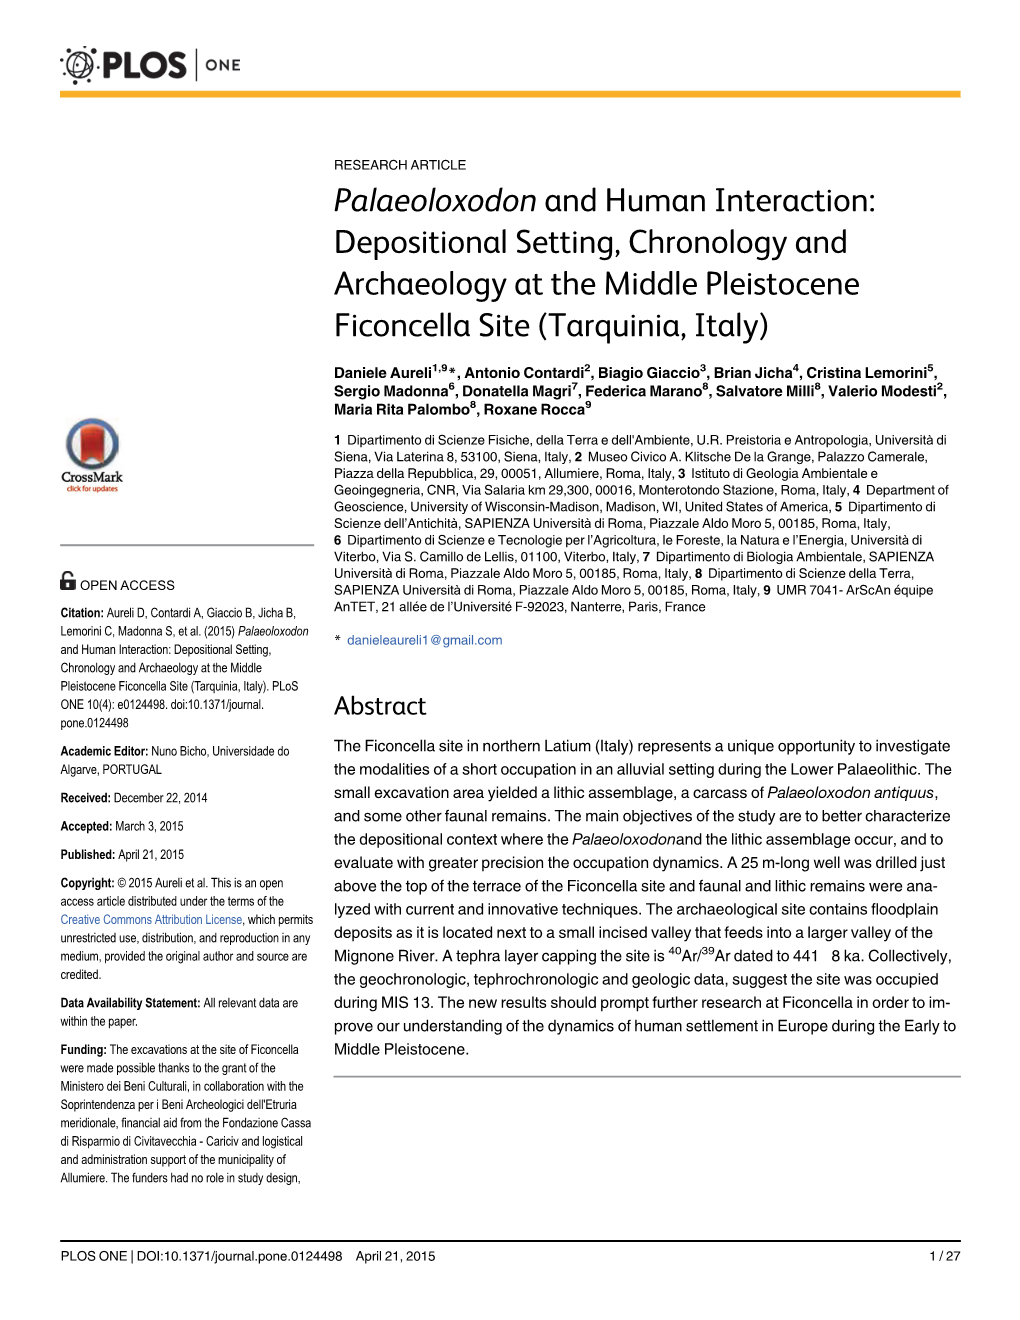 Palaeoloxodon and Human Interaction: Depositional Setting, Chronology and Archaeology at the Middle Pleistocene Ficoncella Site (Tarquinia, Italy)